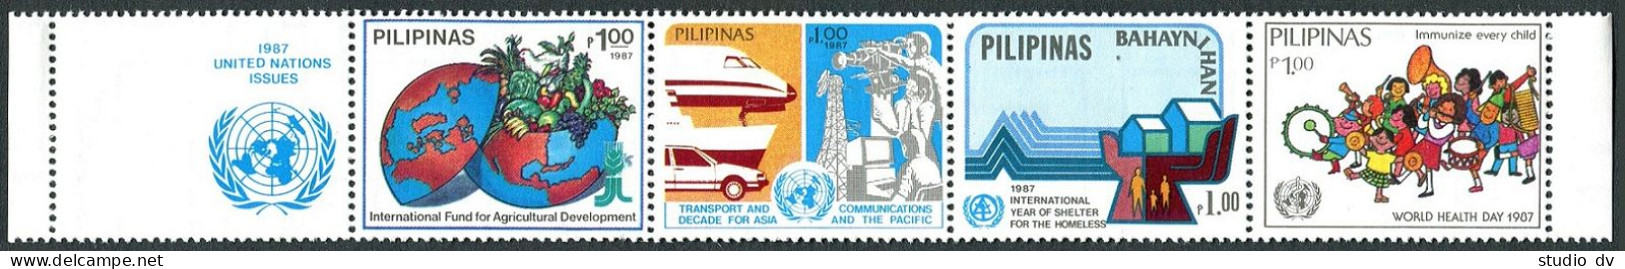 Philippines 1907 Ad Perf & Imperf  Strips, MNH. UN Projects 1987. FAO, IYSH-1987 - Filippine